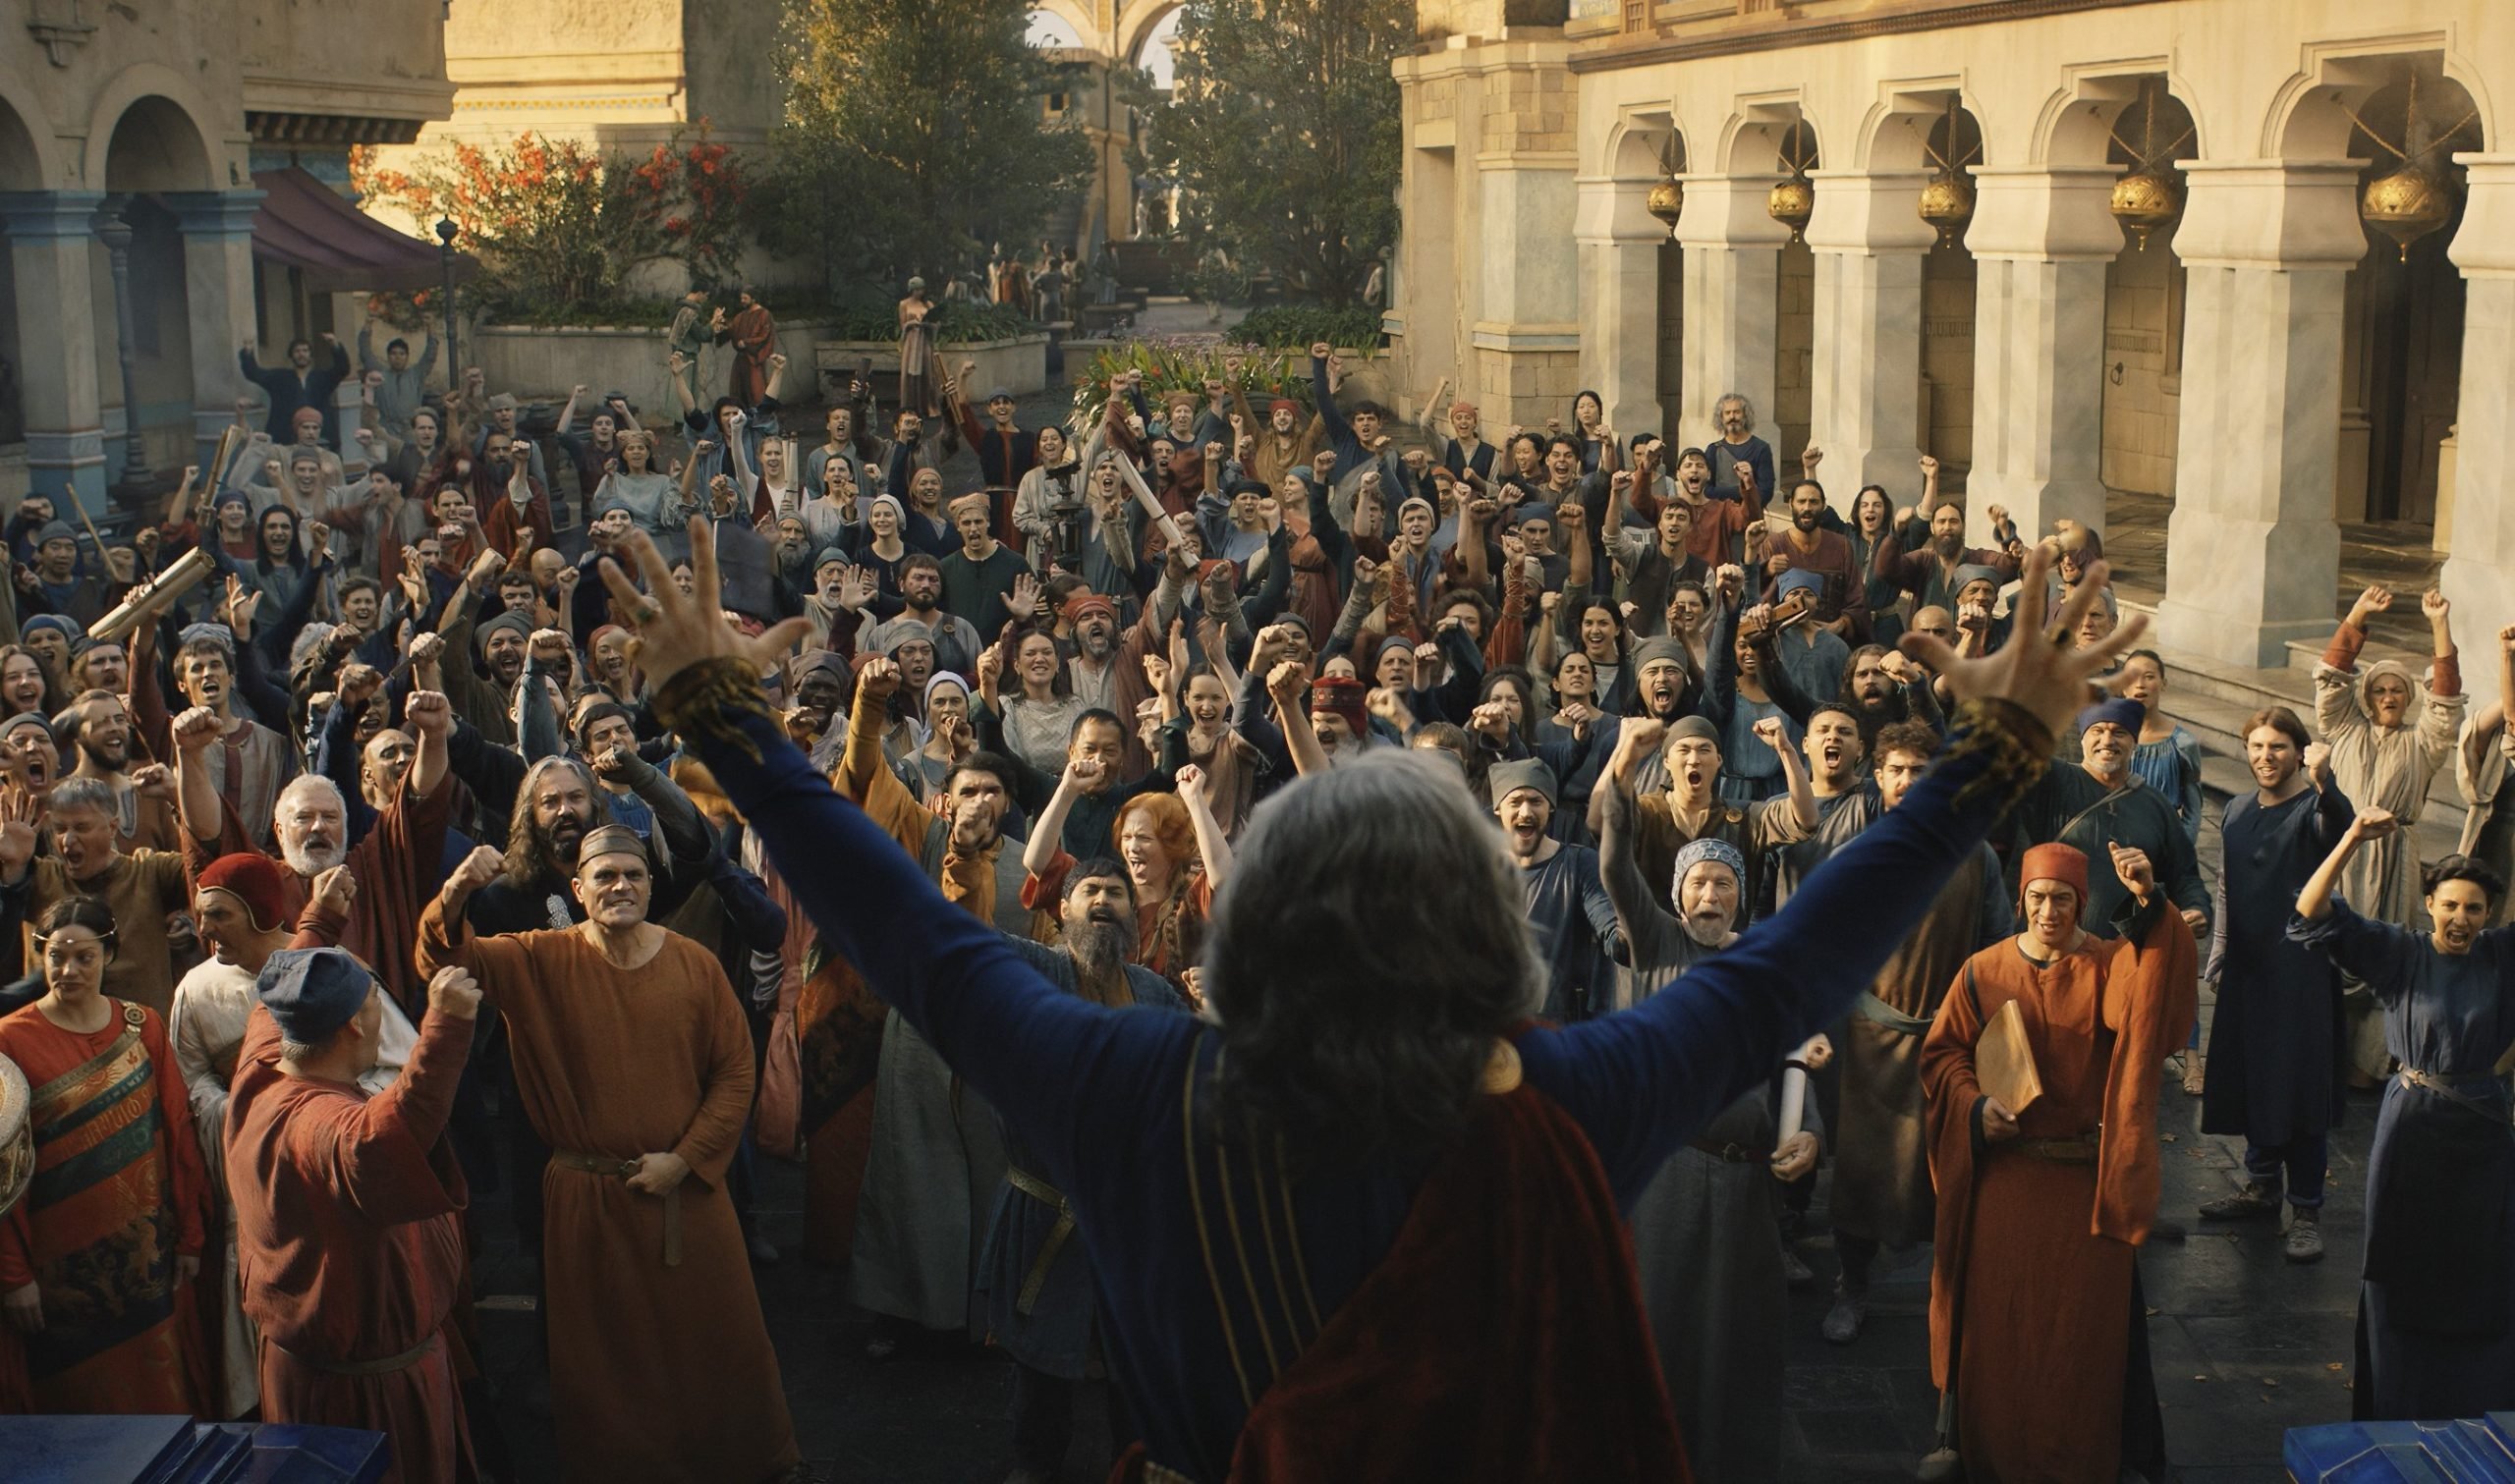 An image of Ar-Pharazon from 'The Lord of the Rings: The Rings of Power,' which is not adapting a single book. The image shows a man standing in front of a crowd and raising his arms.